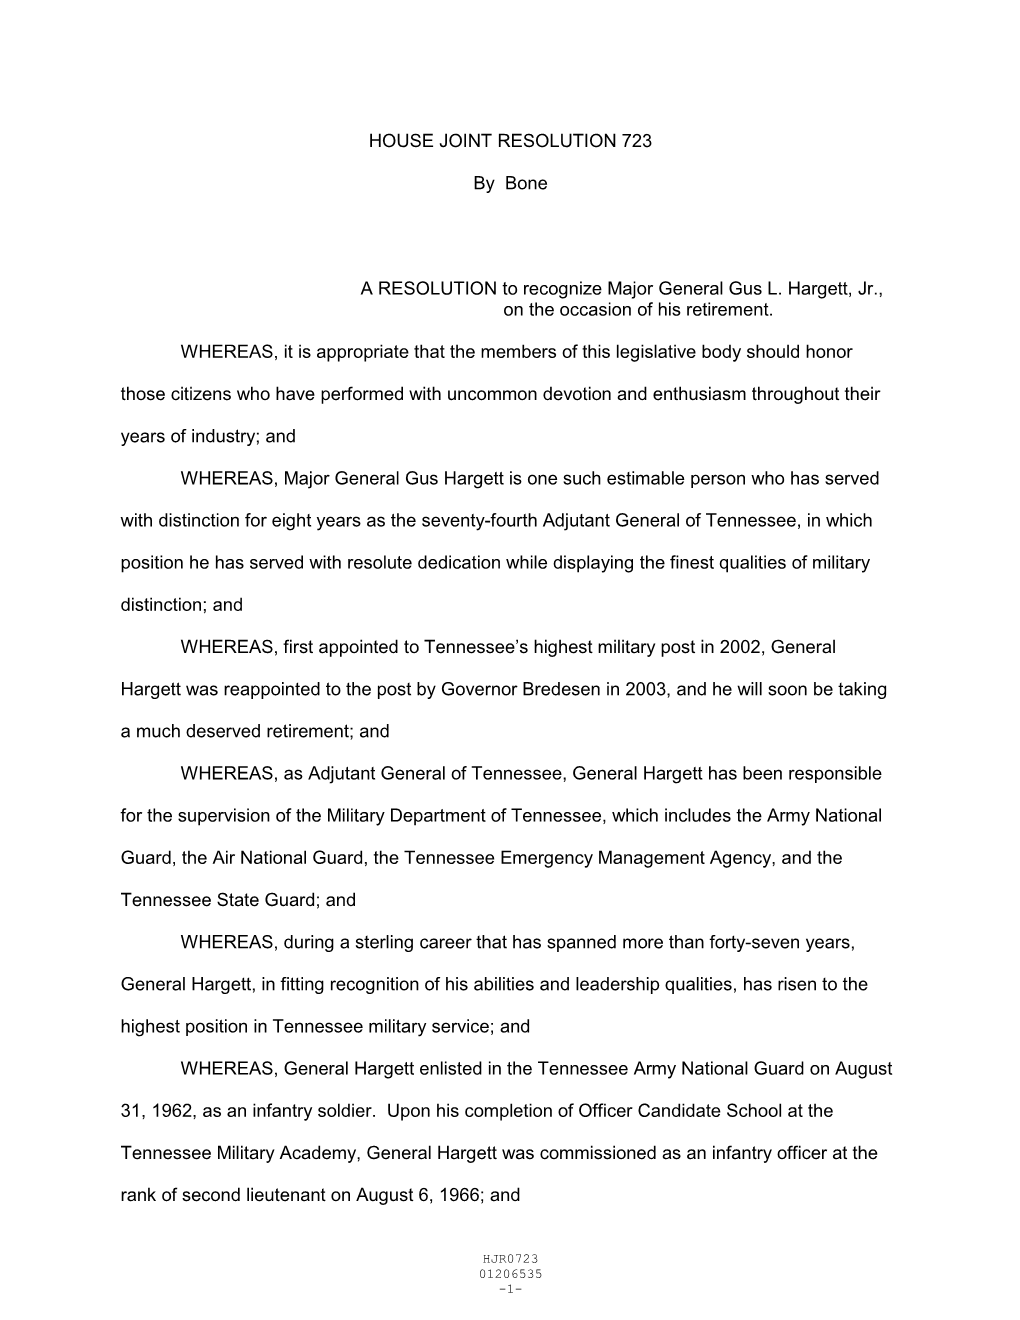 HOUSE JOINT RESOLUTION 723 by Bone a RESOLUTION to Recognize Major General Gus L. Hargett, Jr., on the Occasion of His Retirem